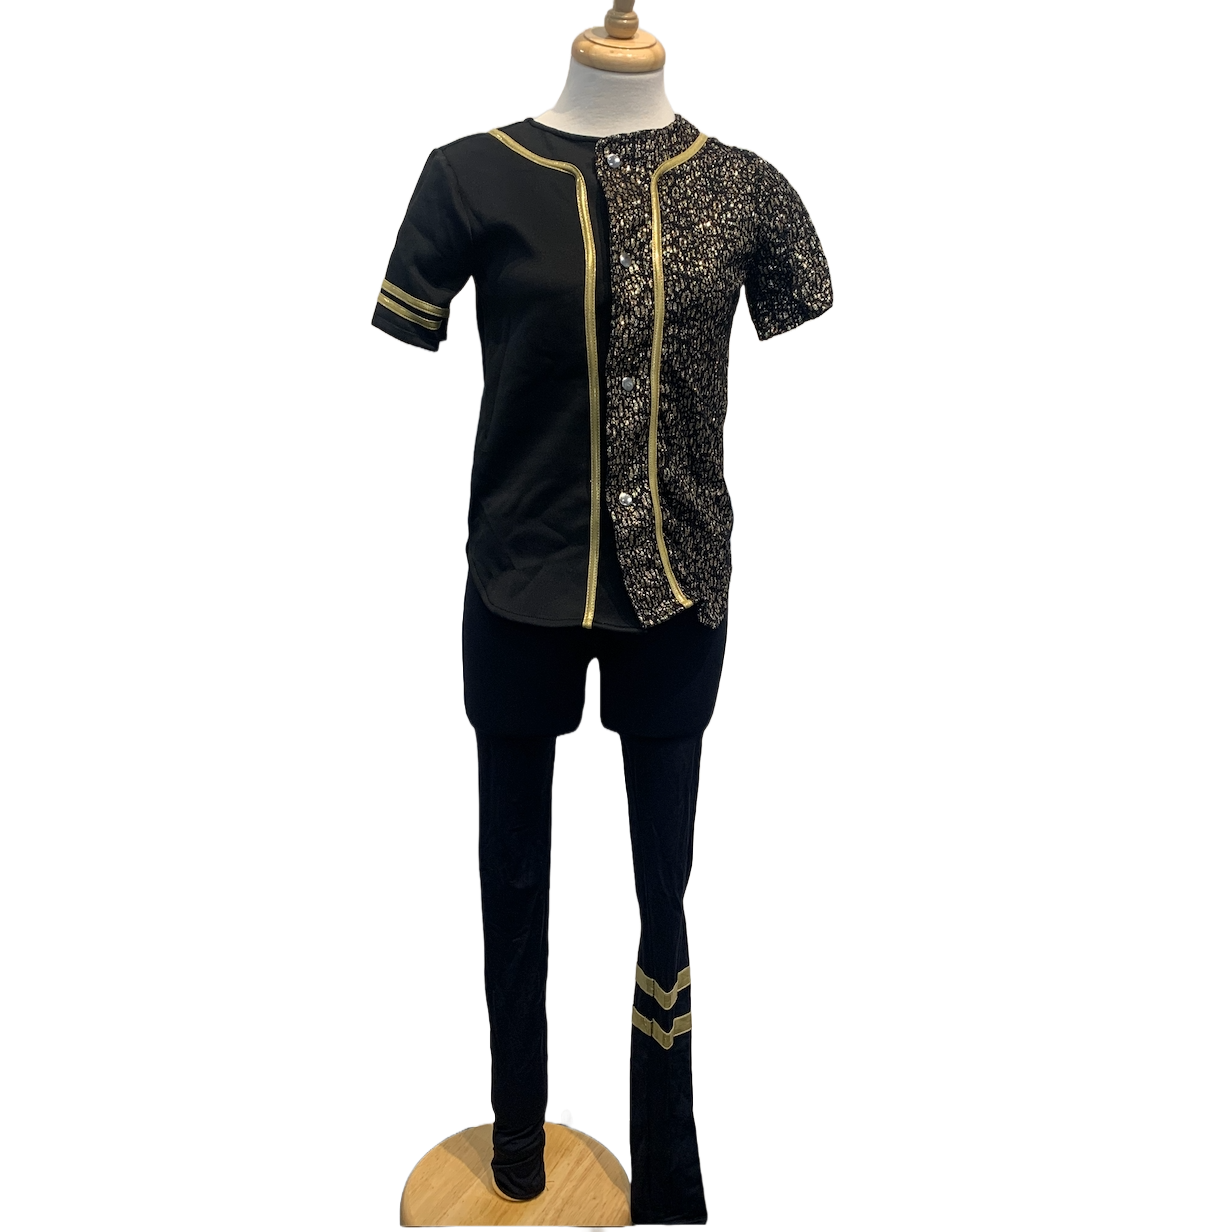 Two Piece Black and Gold Lycra Costume